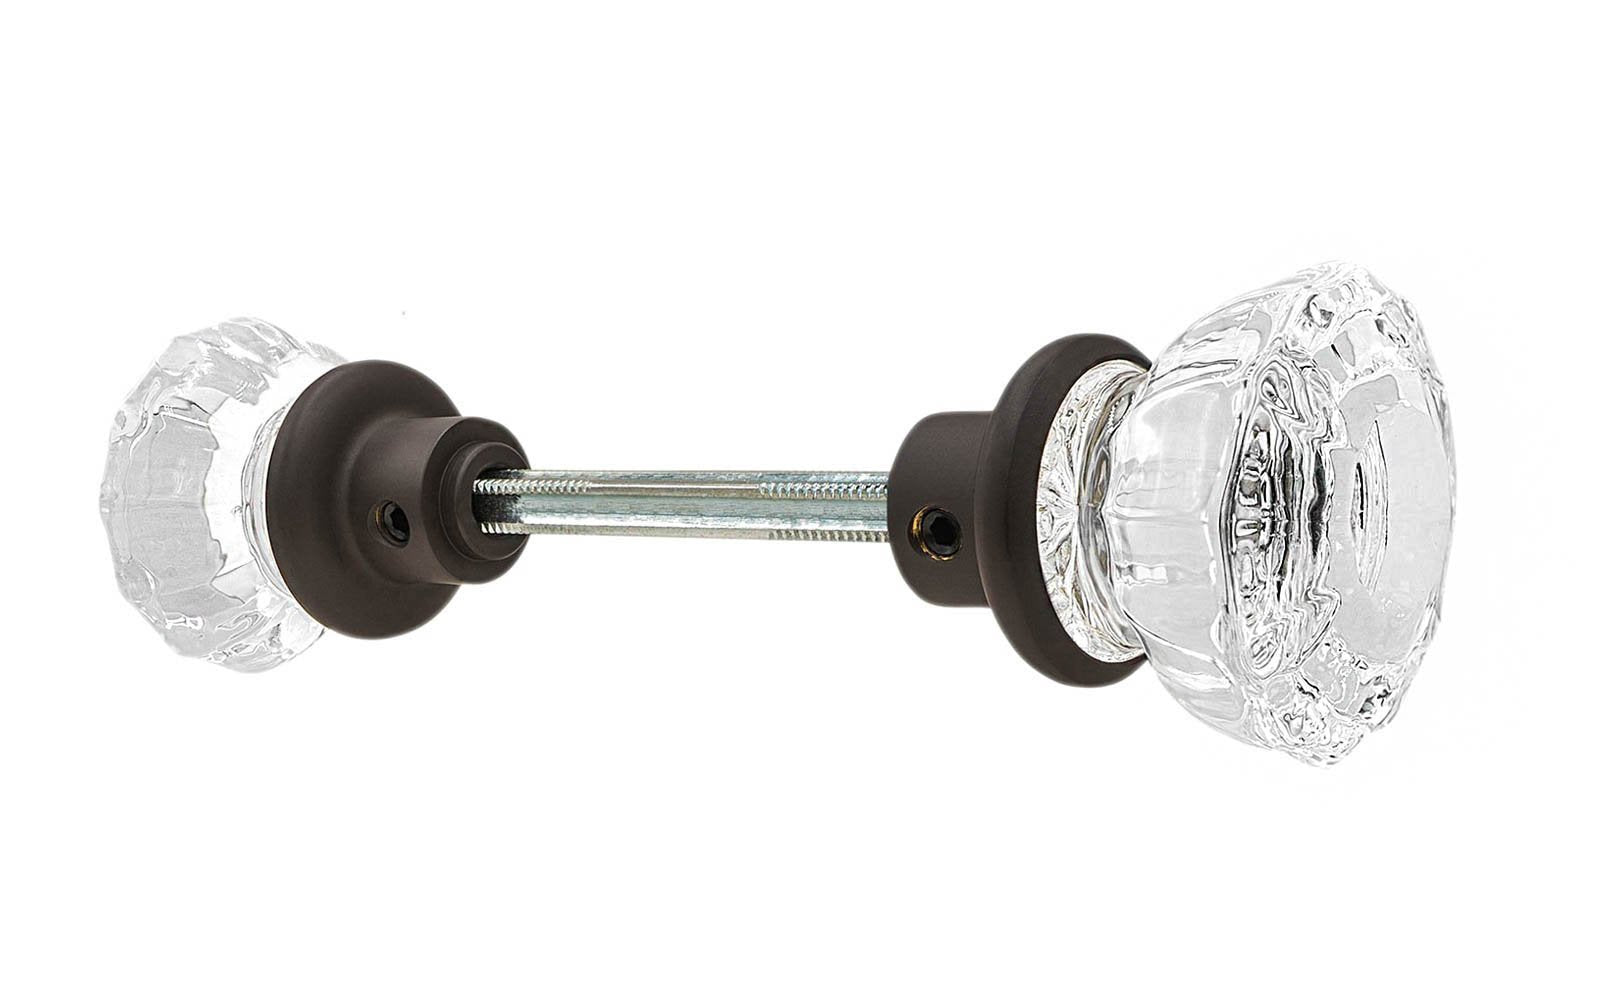 Pair of Classic Fluted Clear Glass Doorknobs with spindle. A high quality & genuine glass doorknob set with an attractive fluted design. The sparkling center point under glass amplifies reflected light to showcase beautiful facets. Solid brass base. Reproduction Glass Door Knobs. Traditional Fluted Glass Knobs. Polished Nickel Finish.